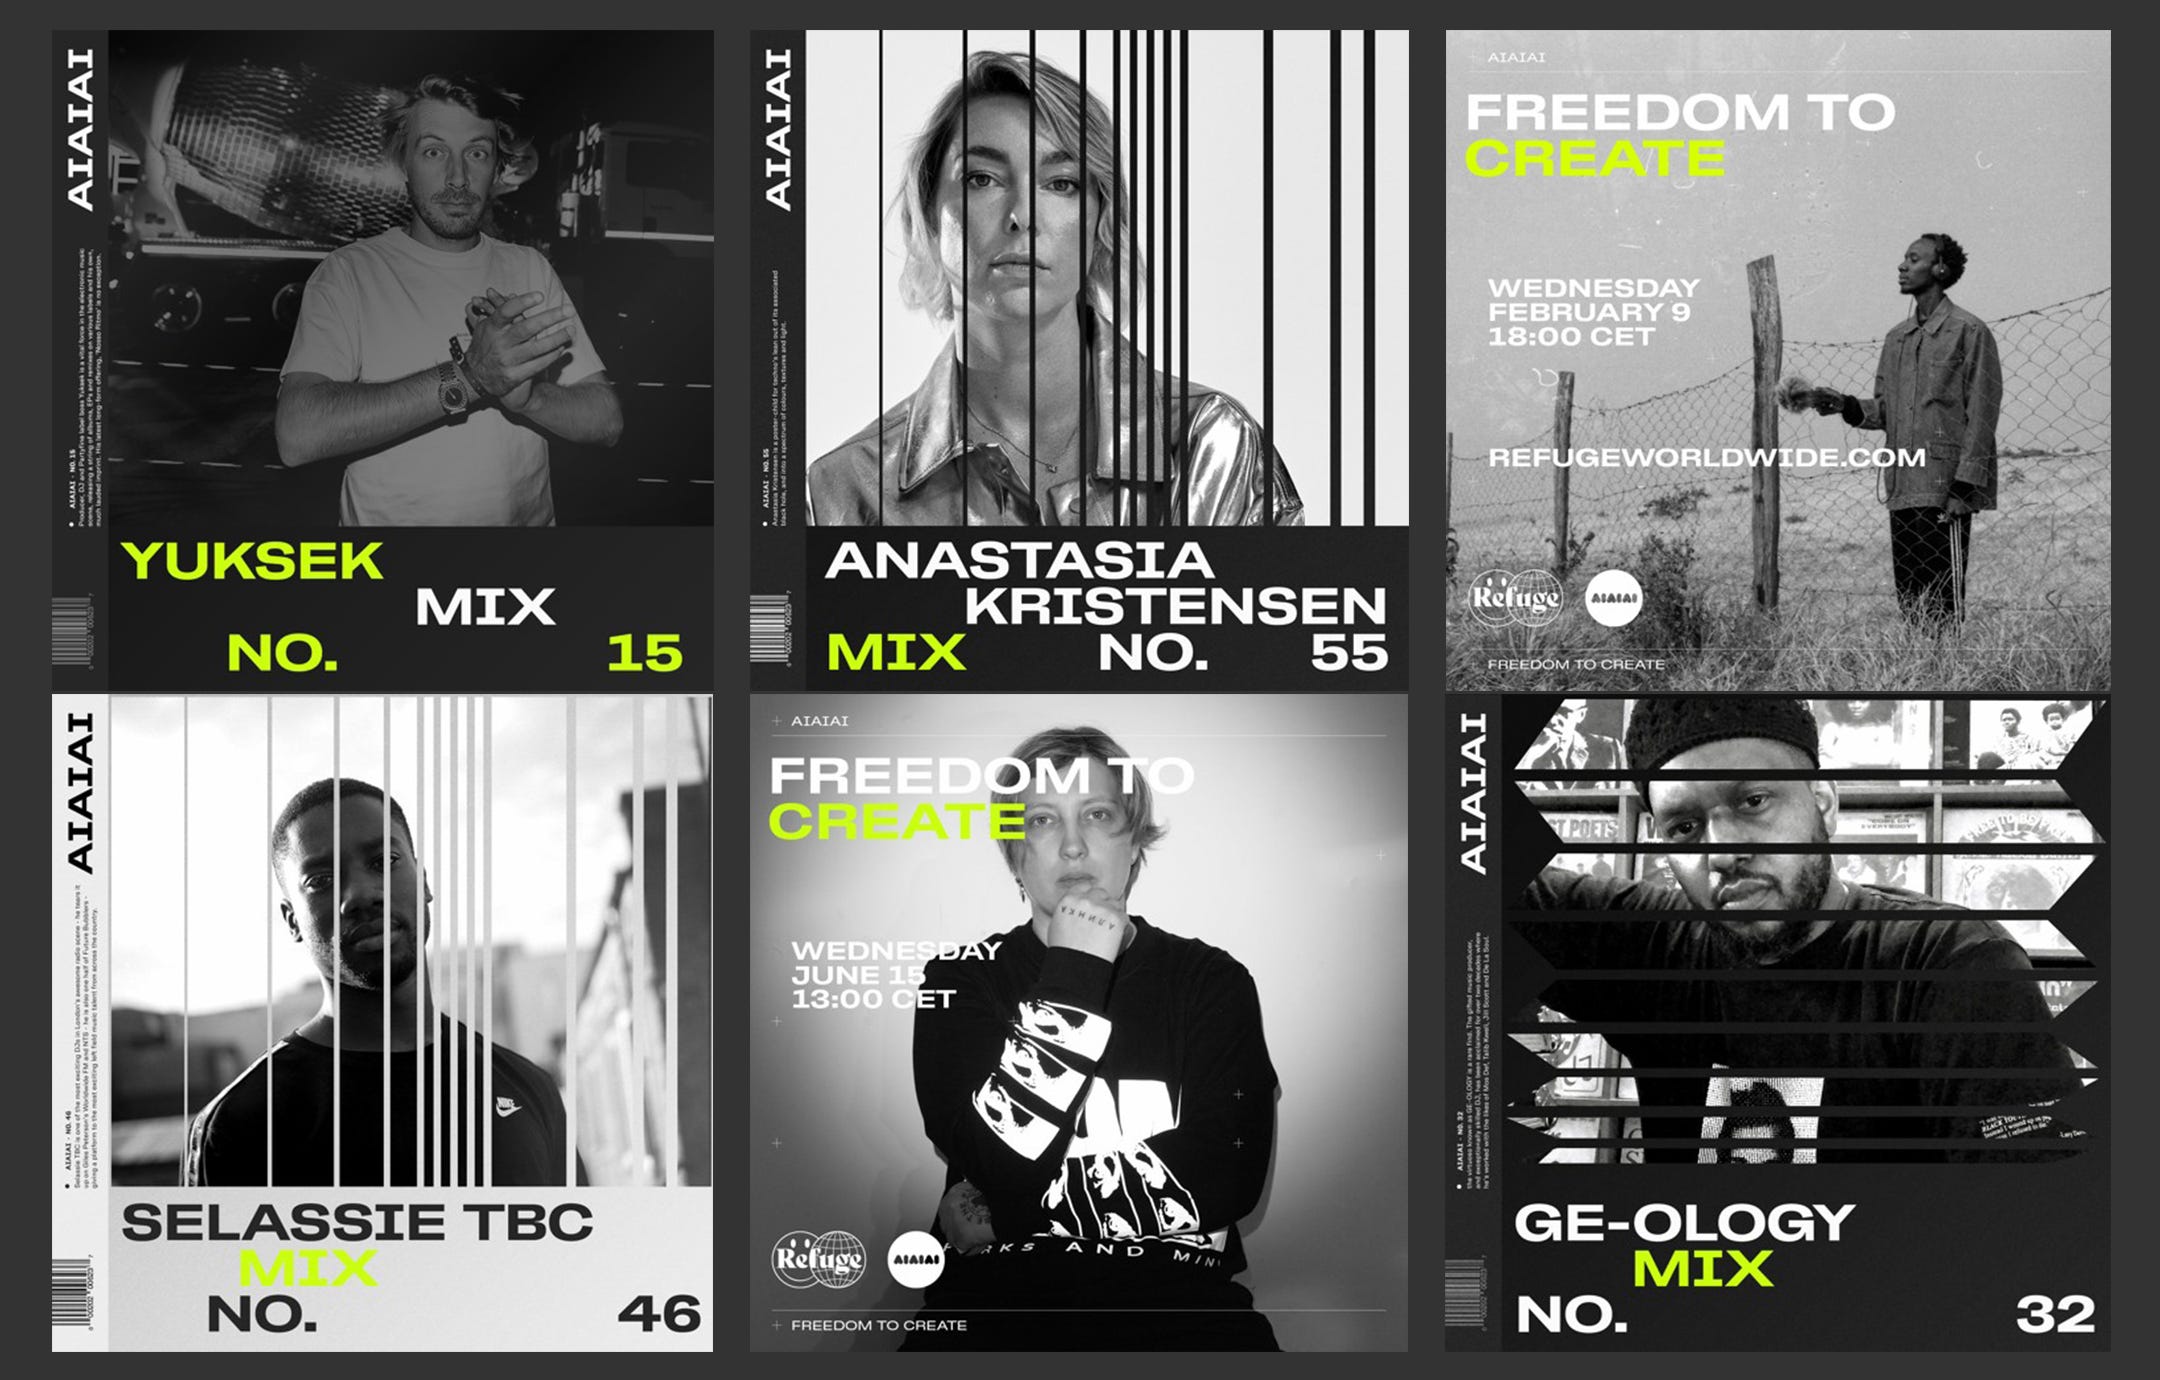 A grid of black-and-white poster designs used as covers to AIAIAI DJ mixes